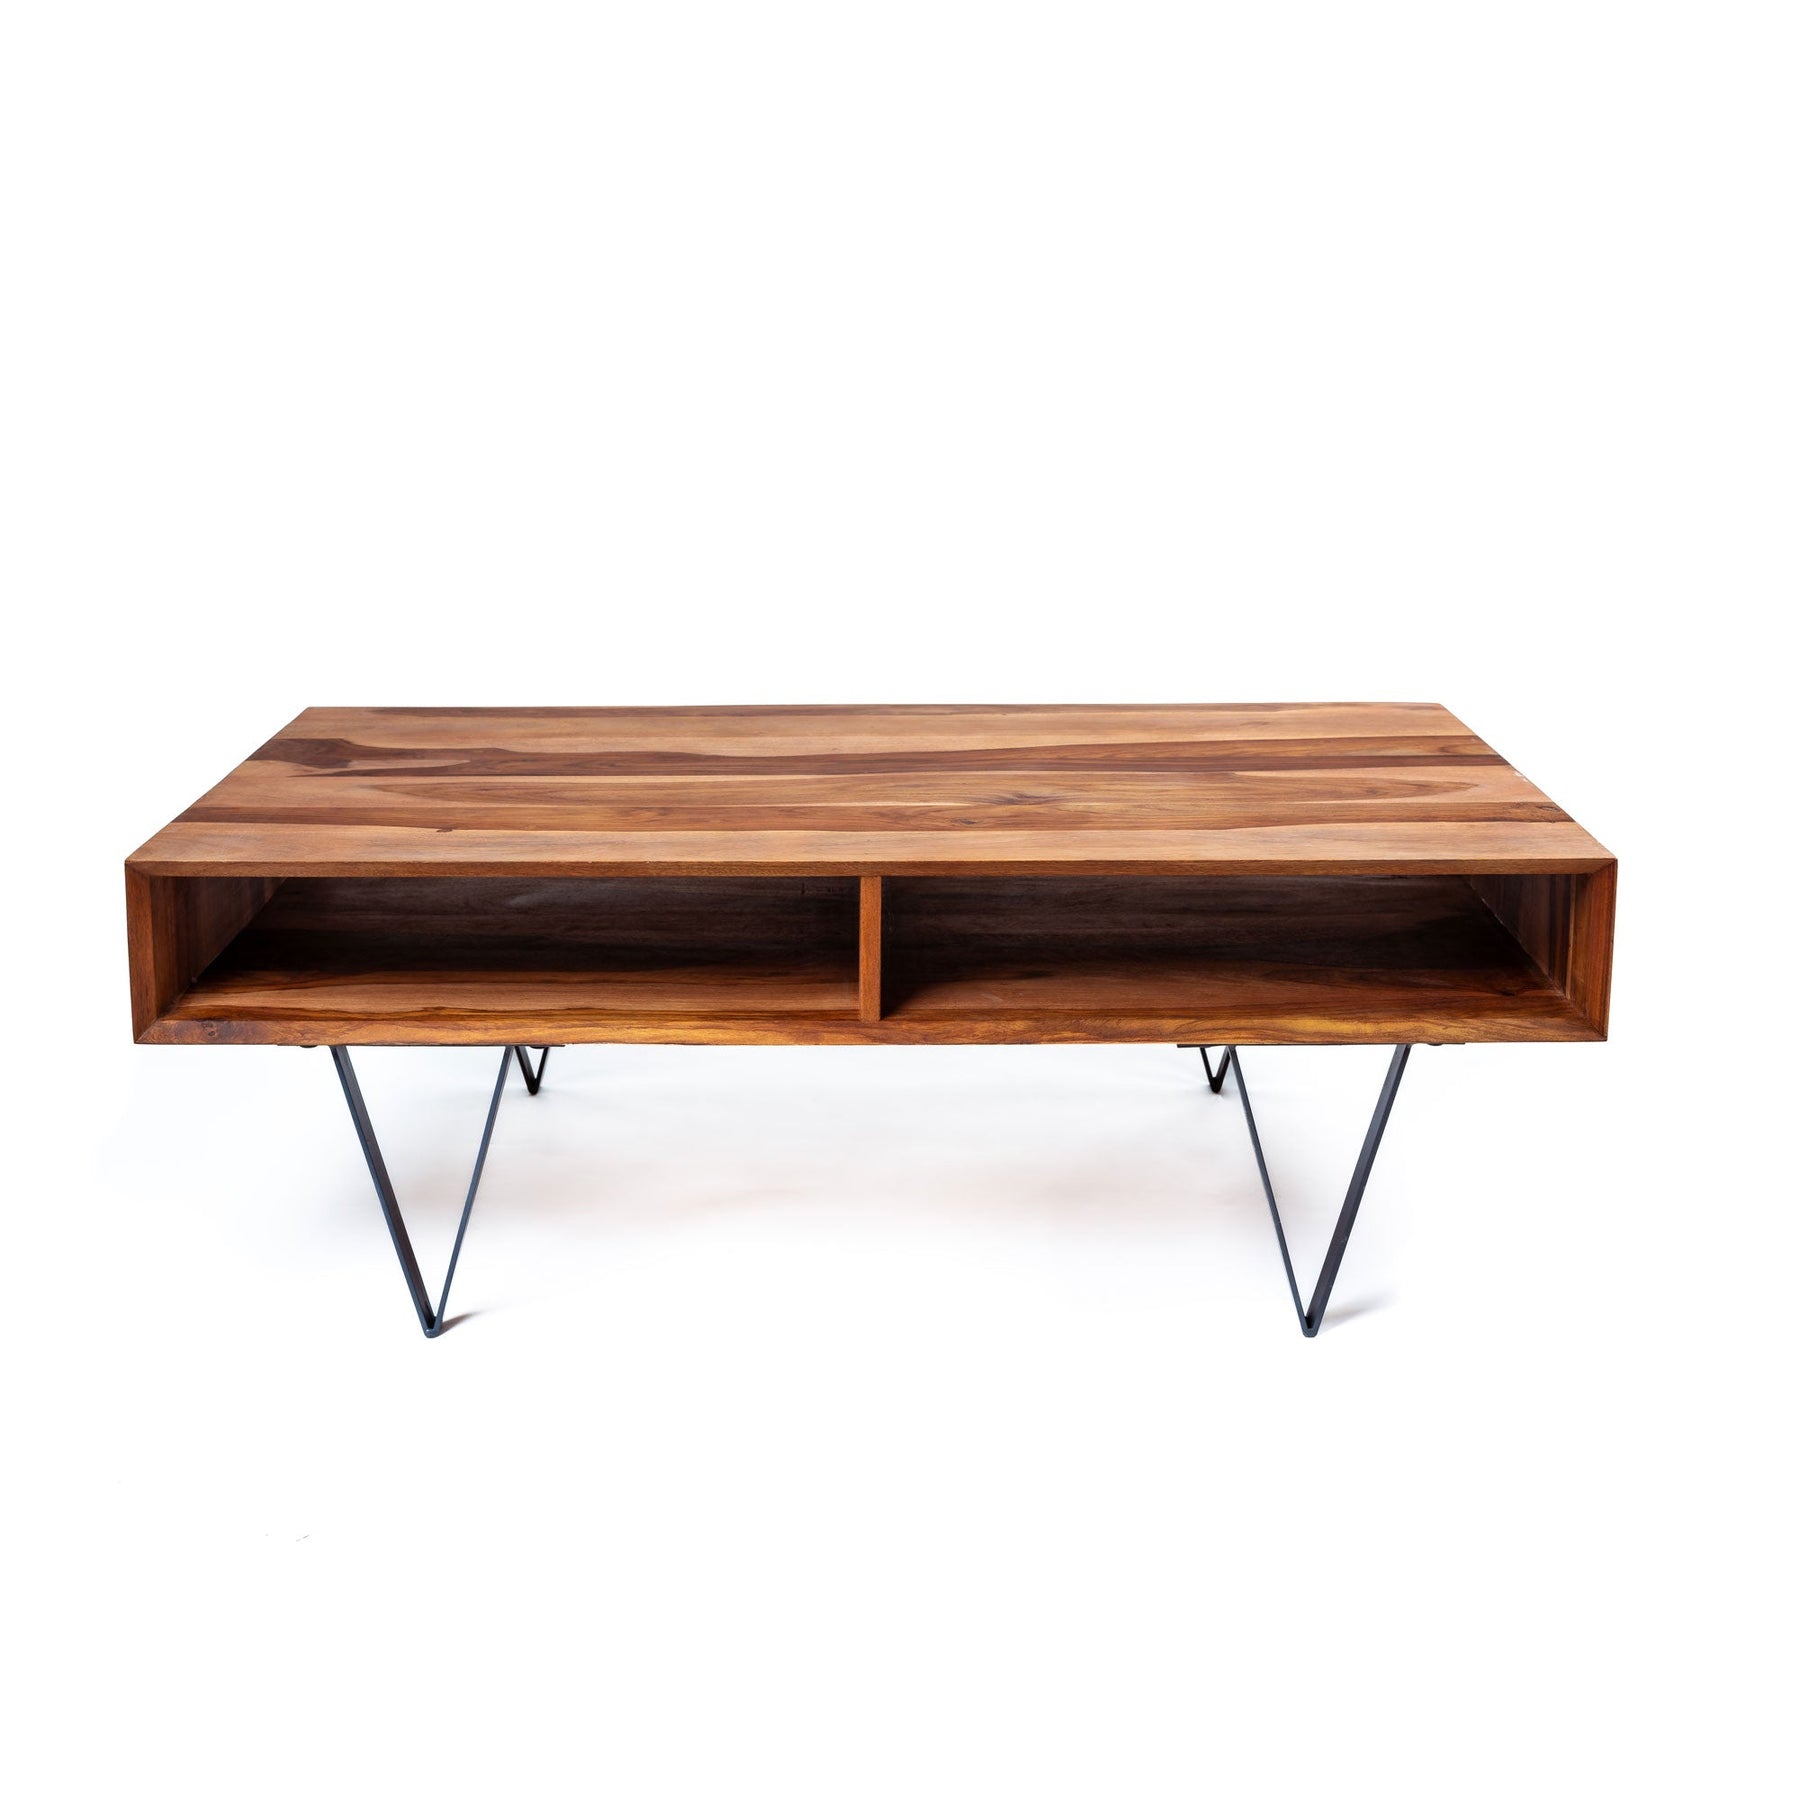 Casa Suarez Metric Coffee Table | Wide Industrial Contemporary Wood Coffee Table | Open Shelf Wooden Coffee Table for Living Room | 45x28x16 inches